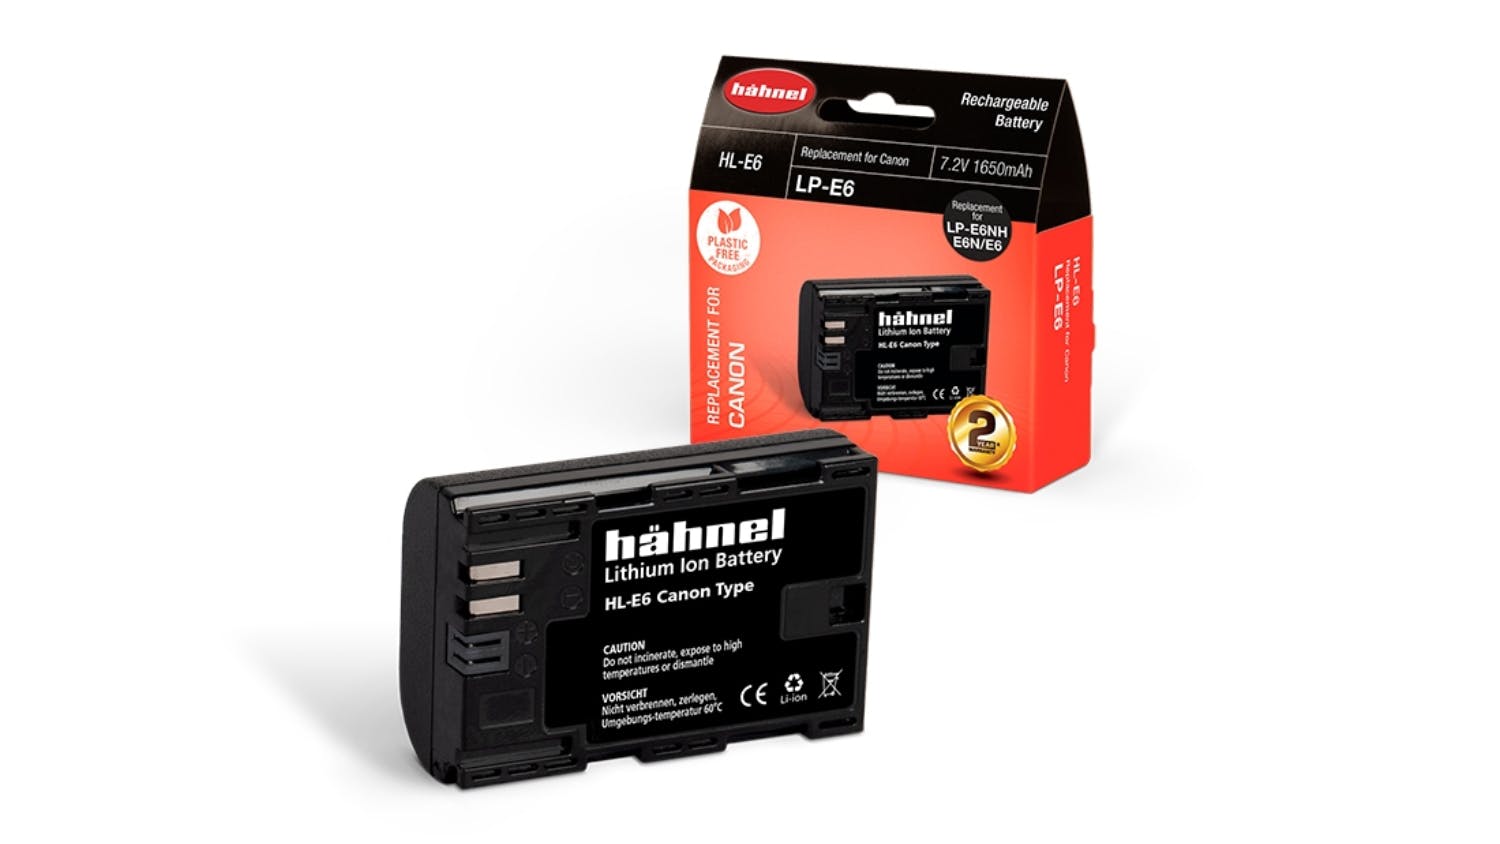 Hahnel HL-E6 Replacement Battery for Canon LP-E6